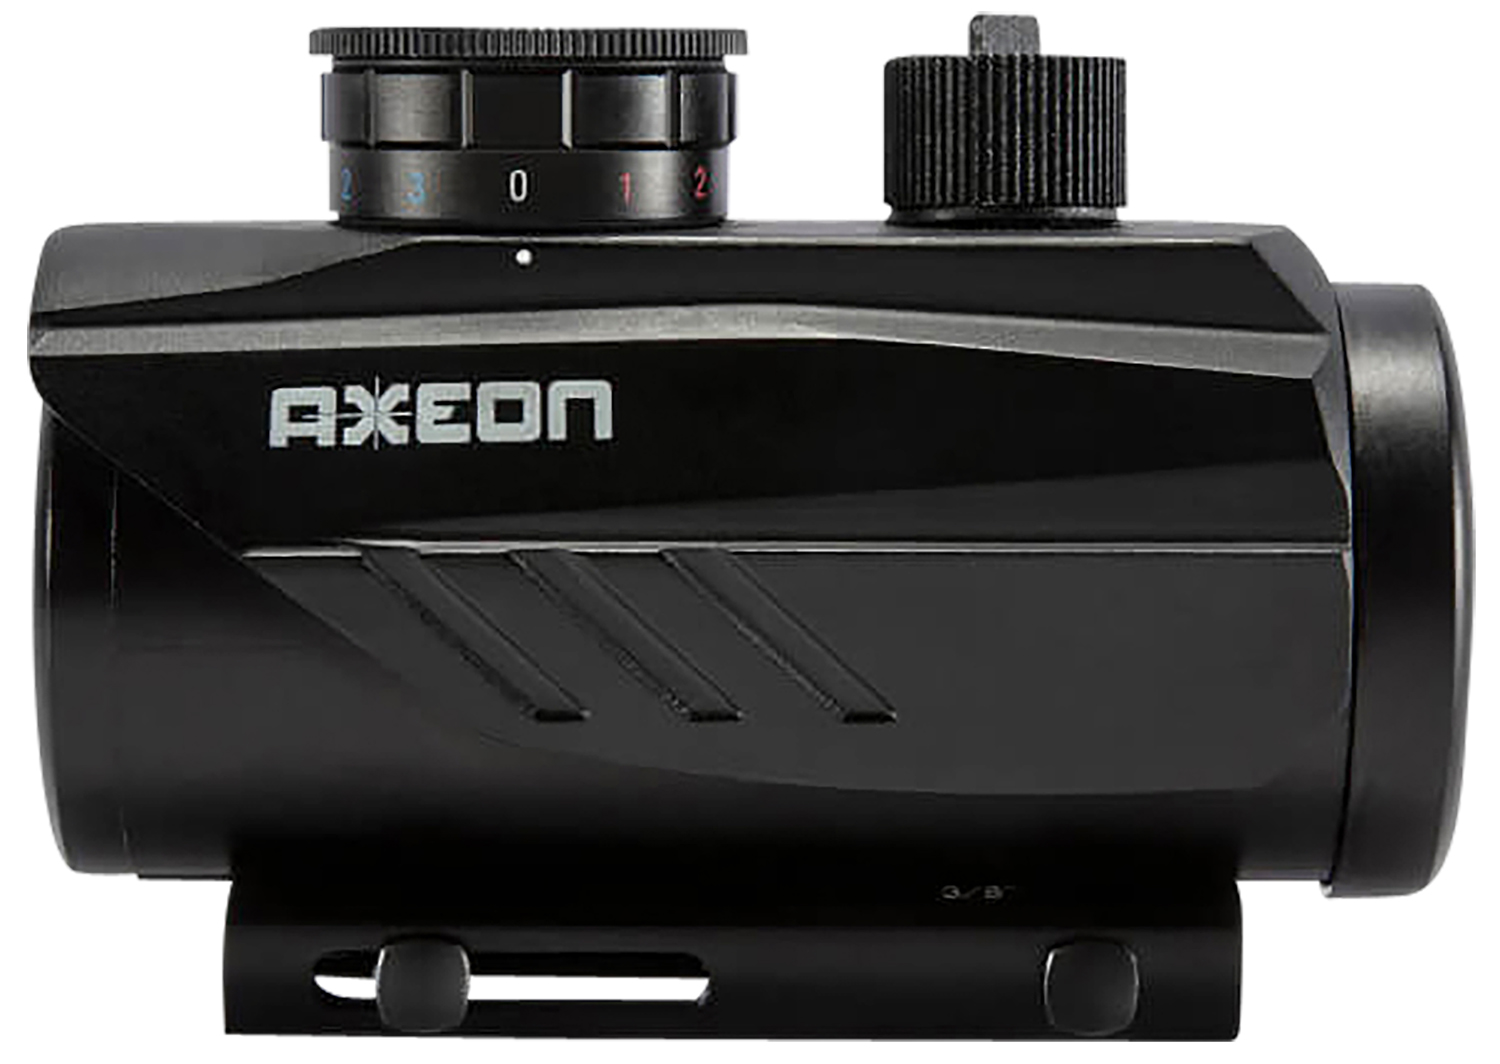 AXEON TRISYCLON 1X30MM SIGHT RED GREEN OR BLUE DOT RETICLE